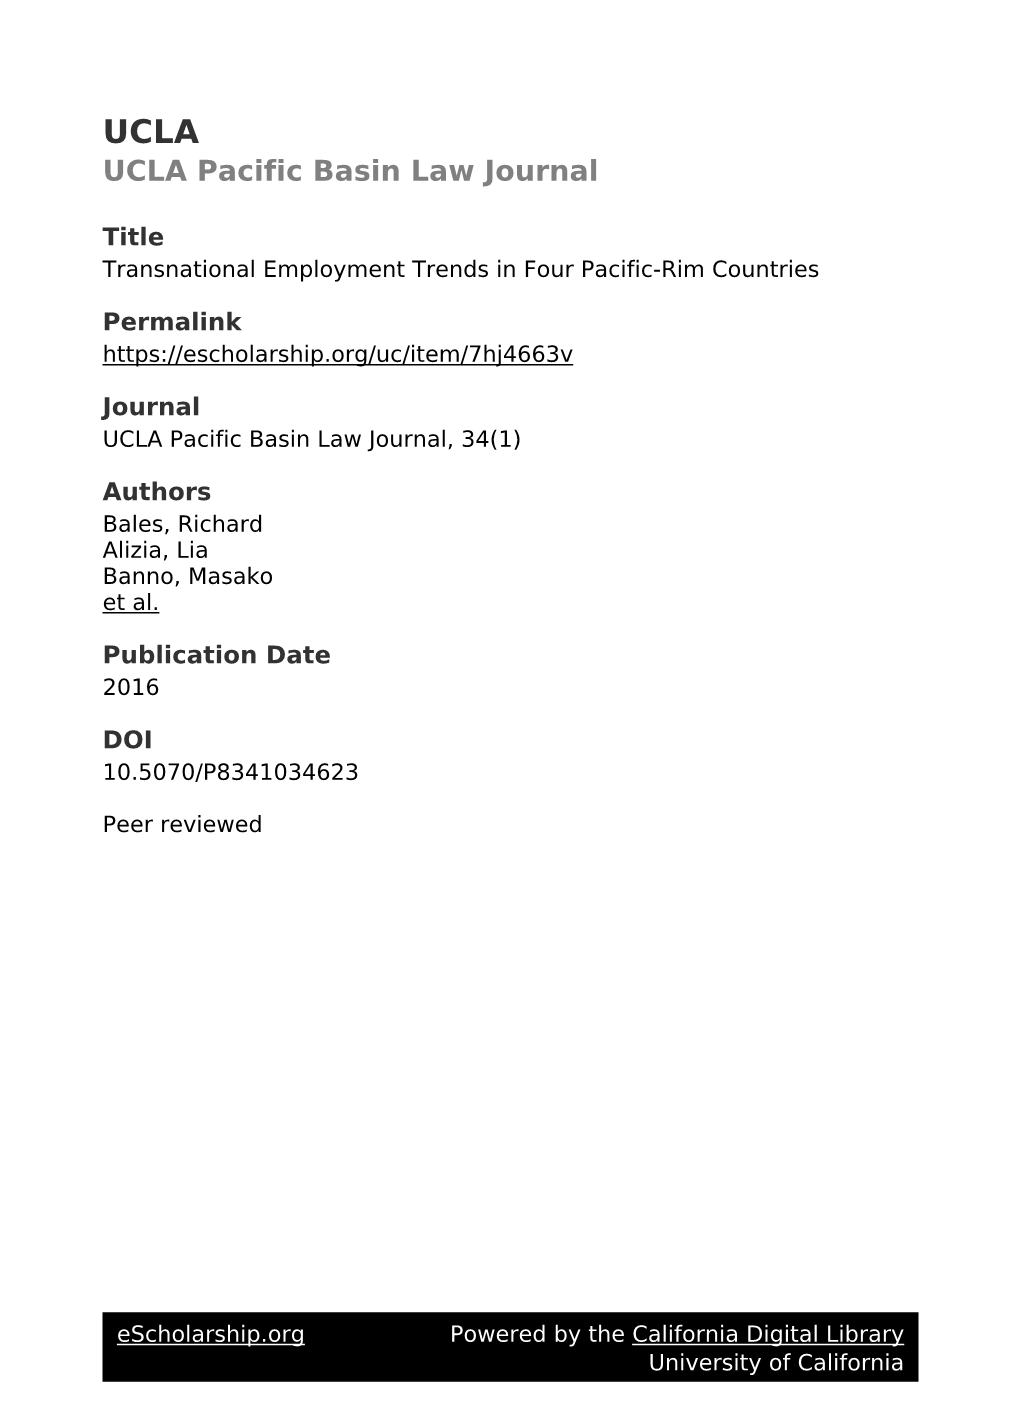 Transnational Employment Trends in Four Pacific-Rim Countries